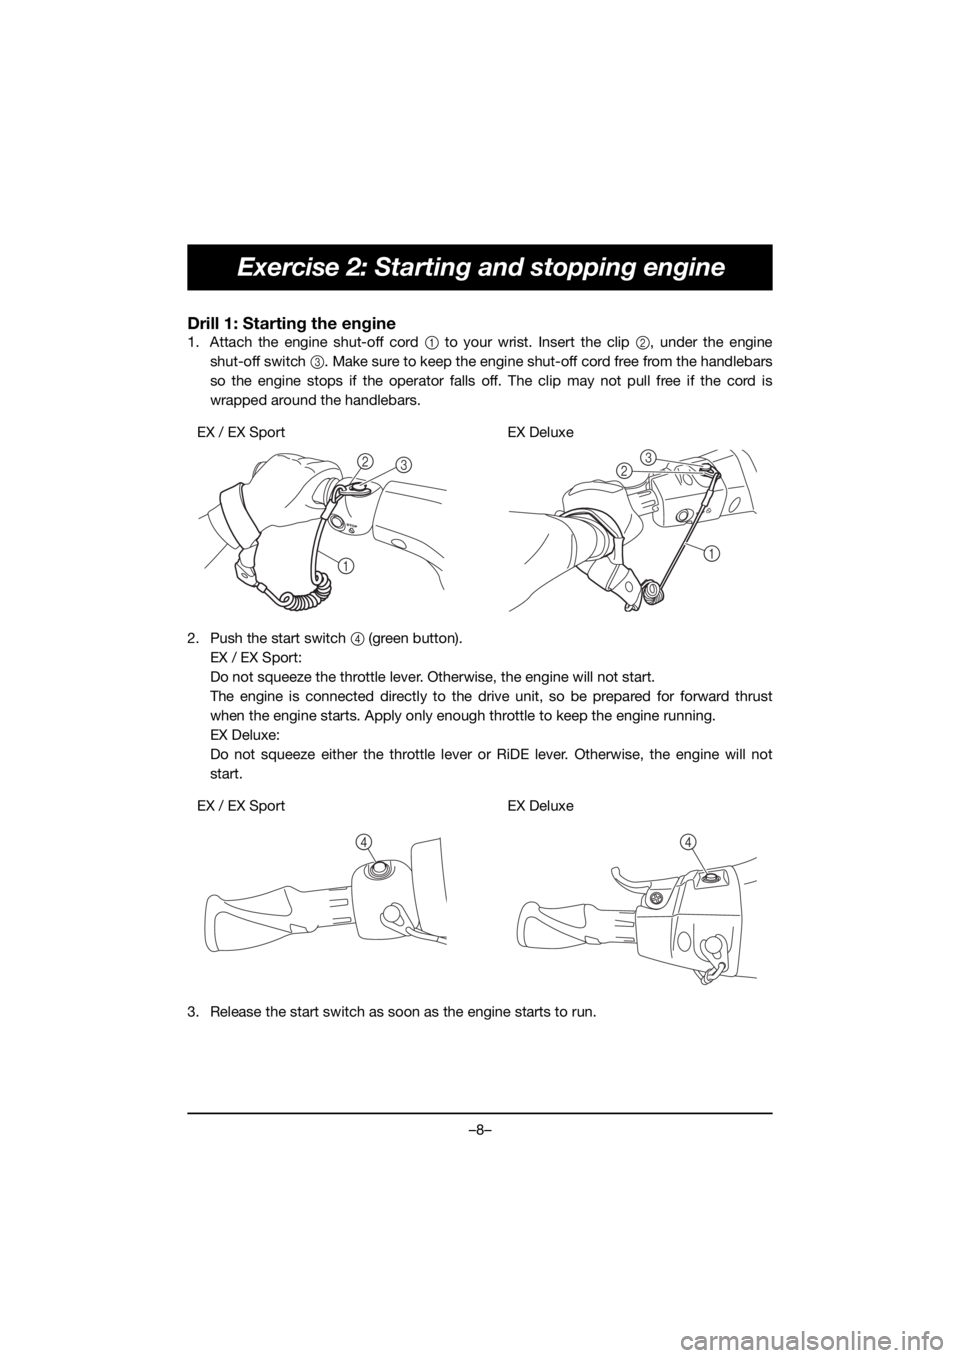 YAMAHA EX SPORT 2020  Manuale duso (in Italian) –8–
Exercise 2: Starting and stopping engine
Drill 1: Starting the engine
1. Attach the engine shut-off cord 1 to your wrist. Insert the clip 2, under the engine
shut-off switch 3. Make sure to ke